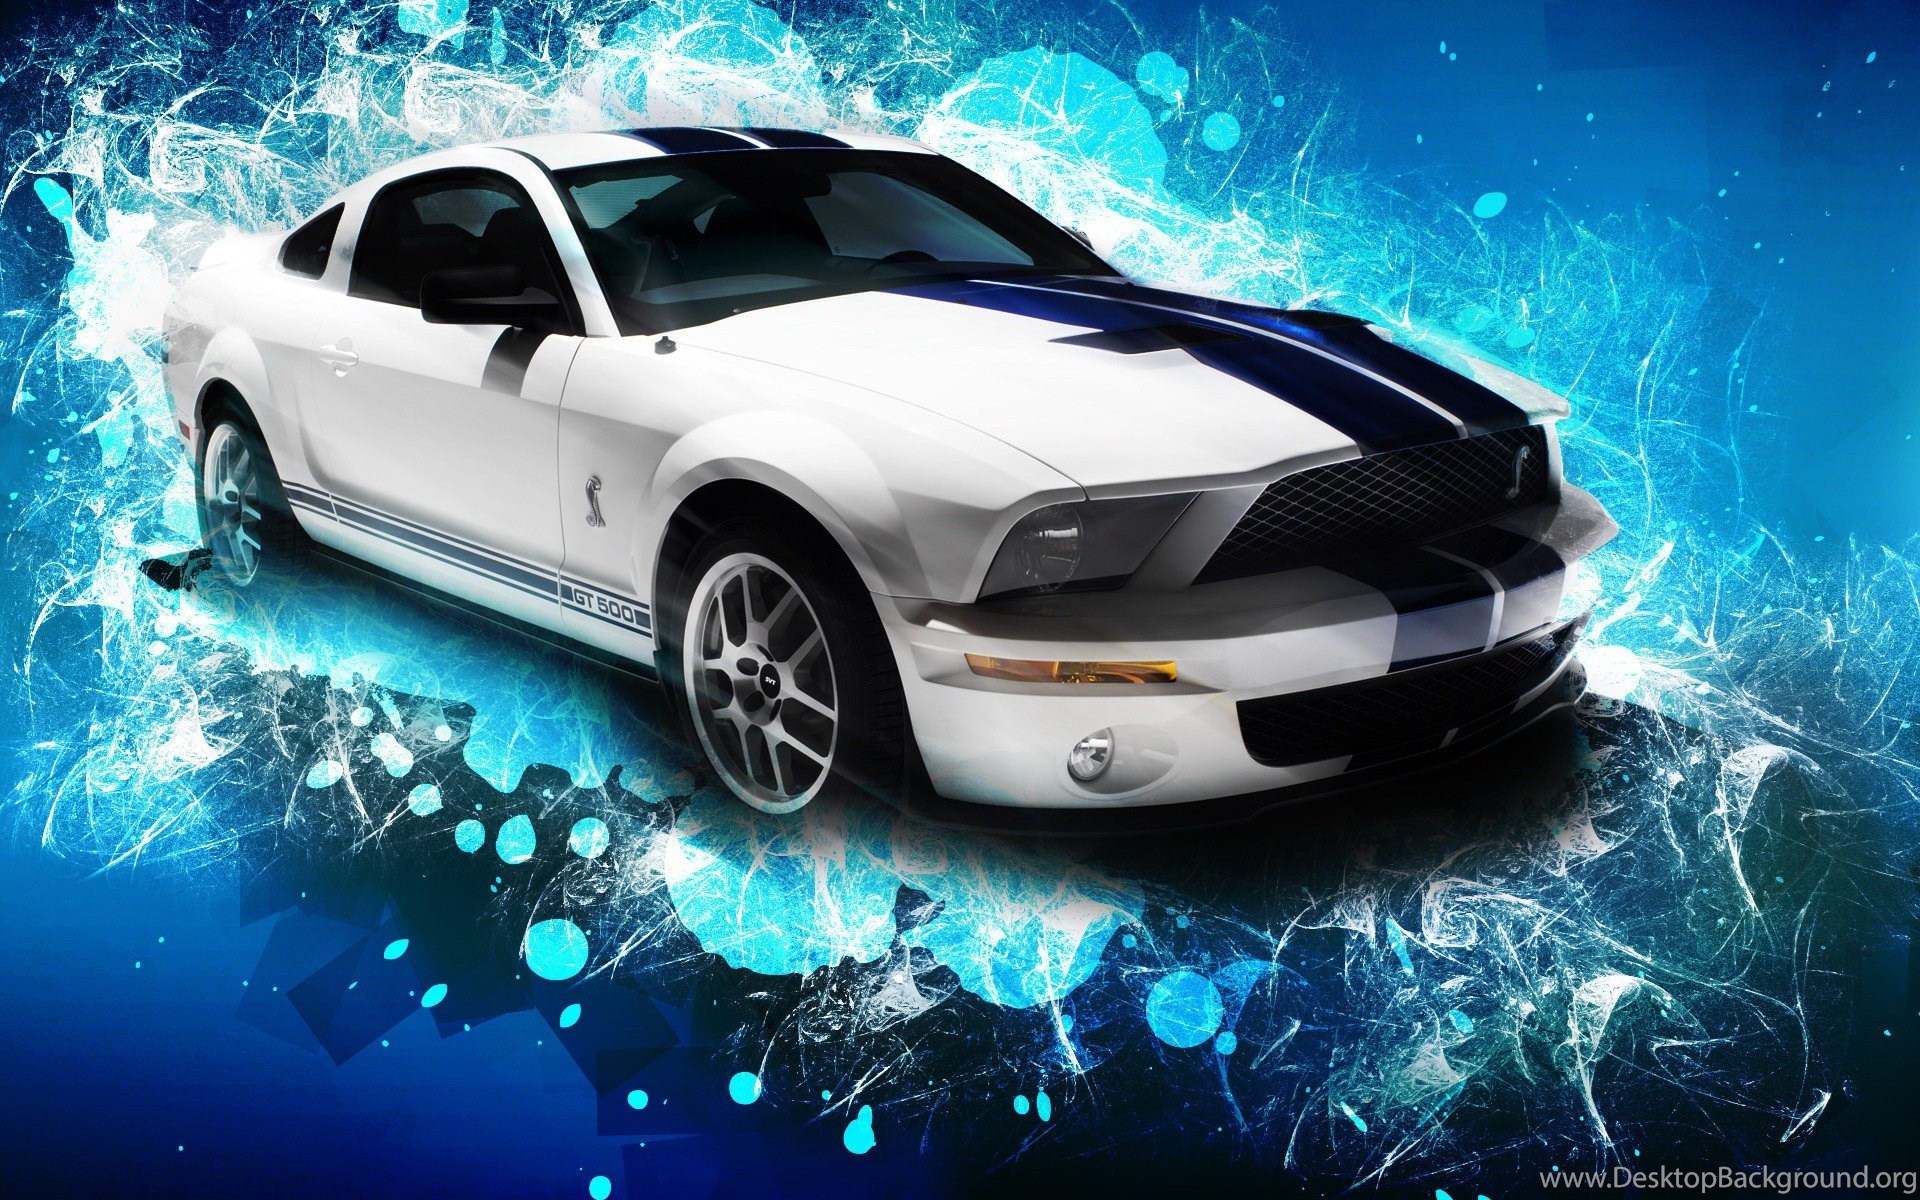 Cars Ford Shelby Mustang Ford Mustang Shelby Gt500 Wallpapers Images, Photos, Reviews